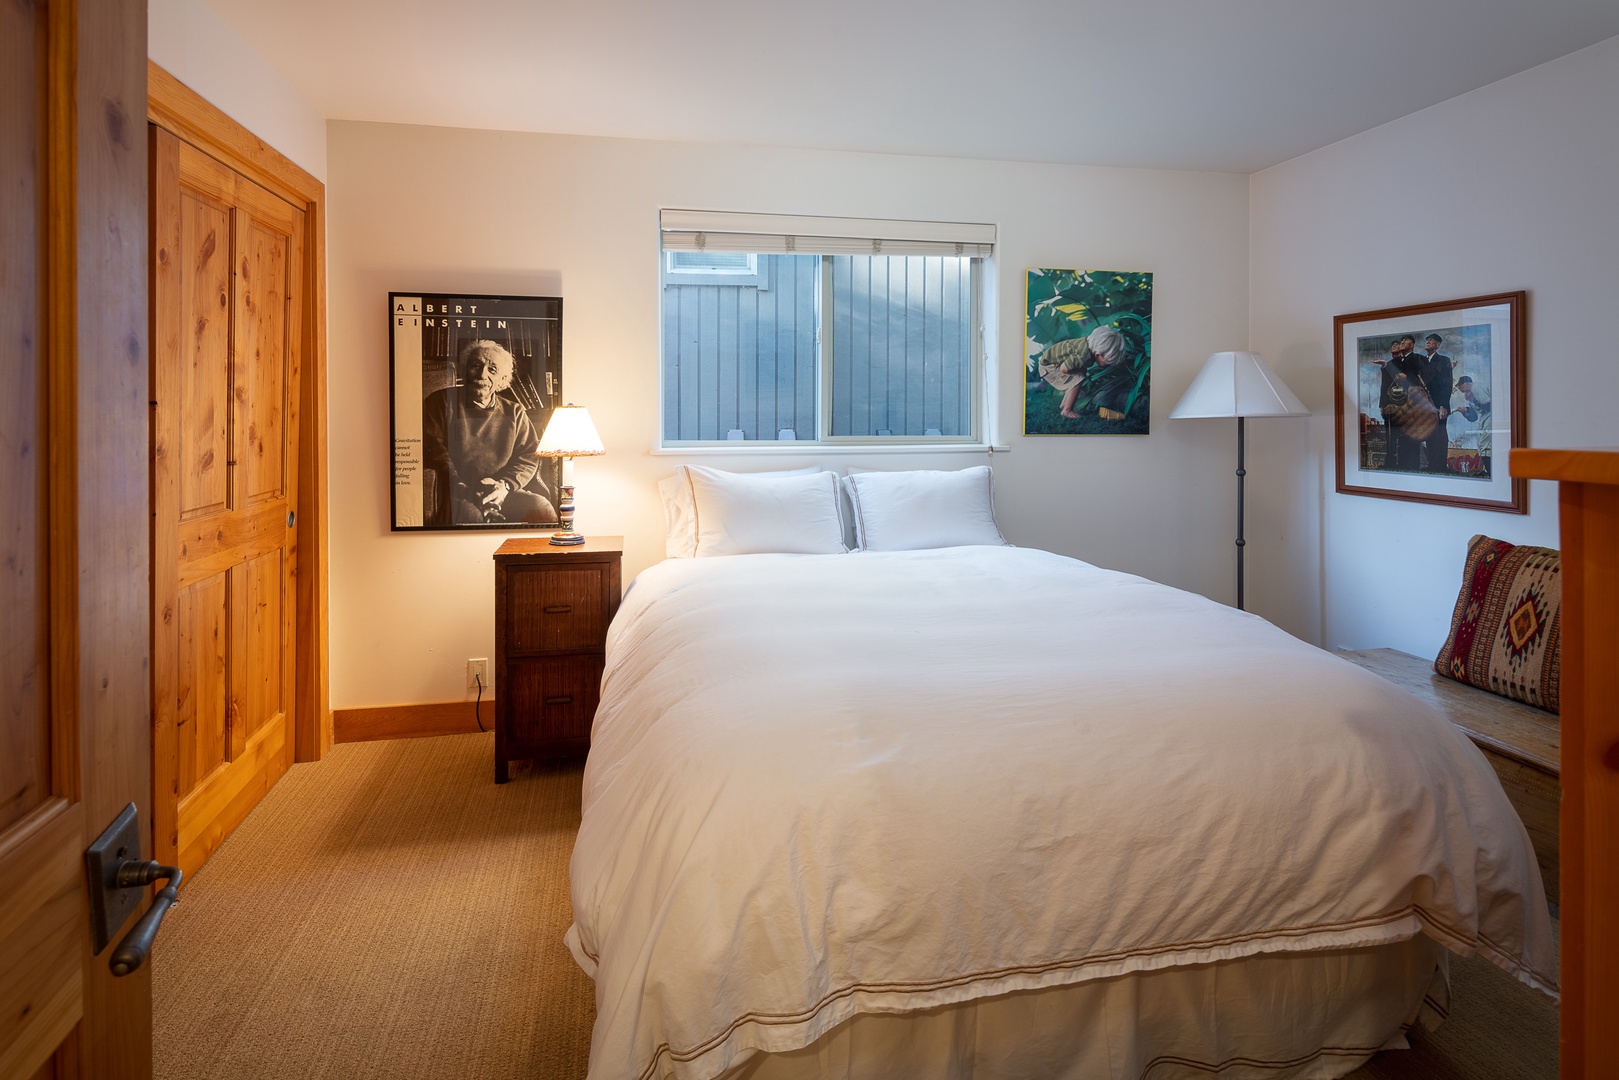 Ketchum Vacation Rentals, Bridgepoint Charm - Guest Bedroom 2 is equipped with a queen bed